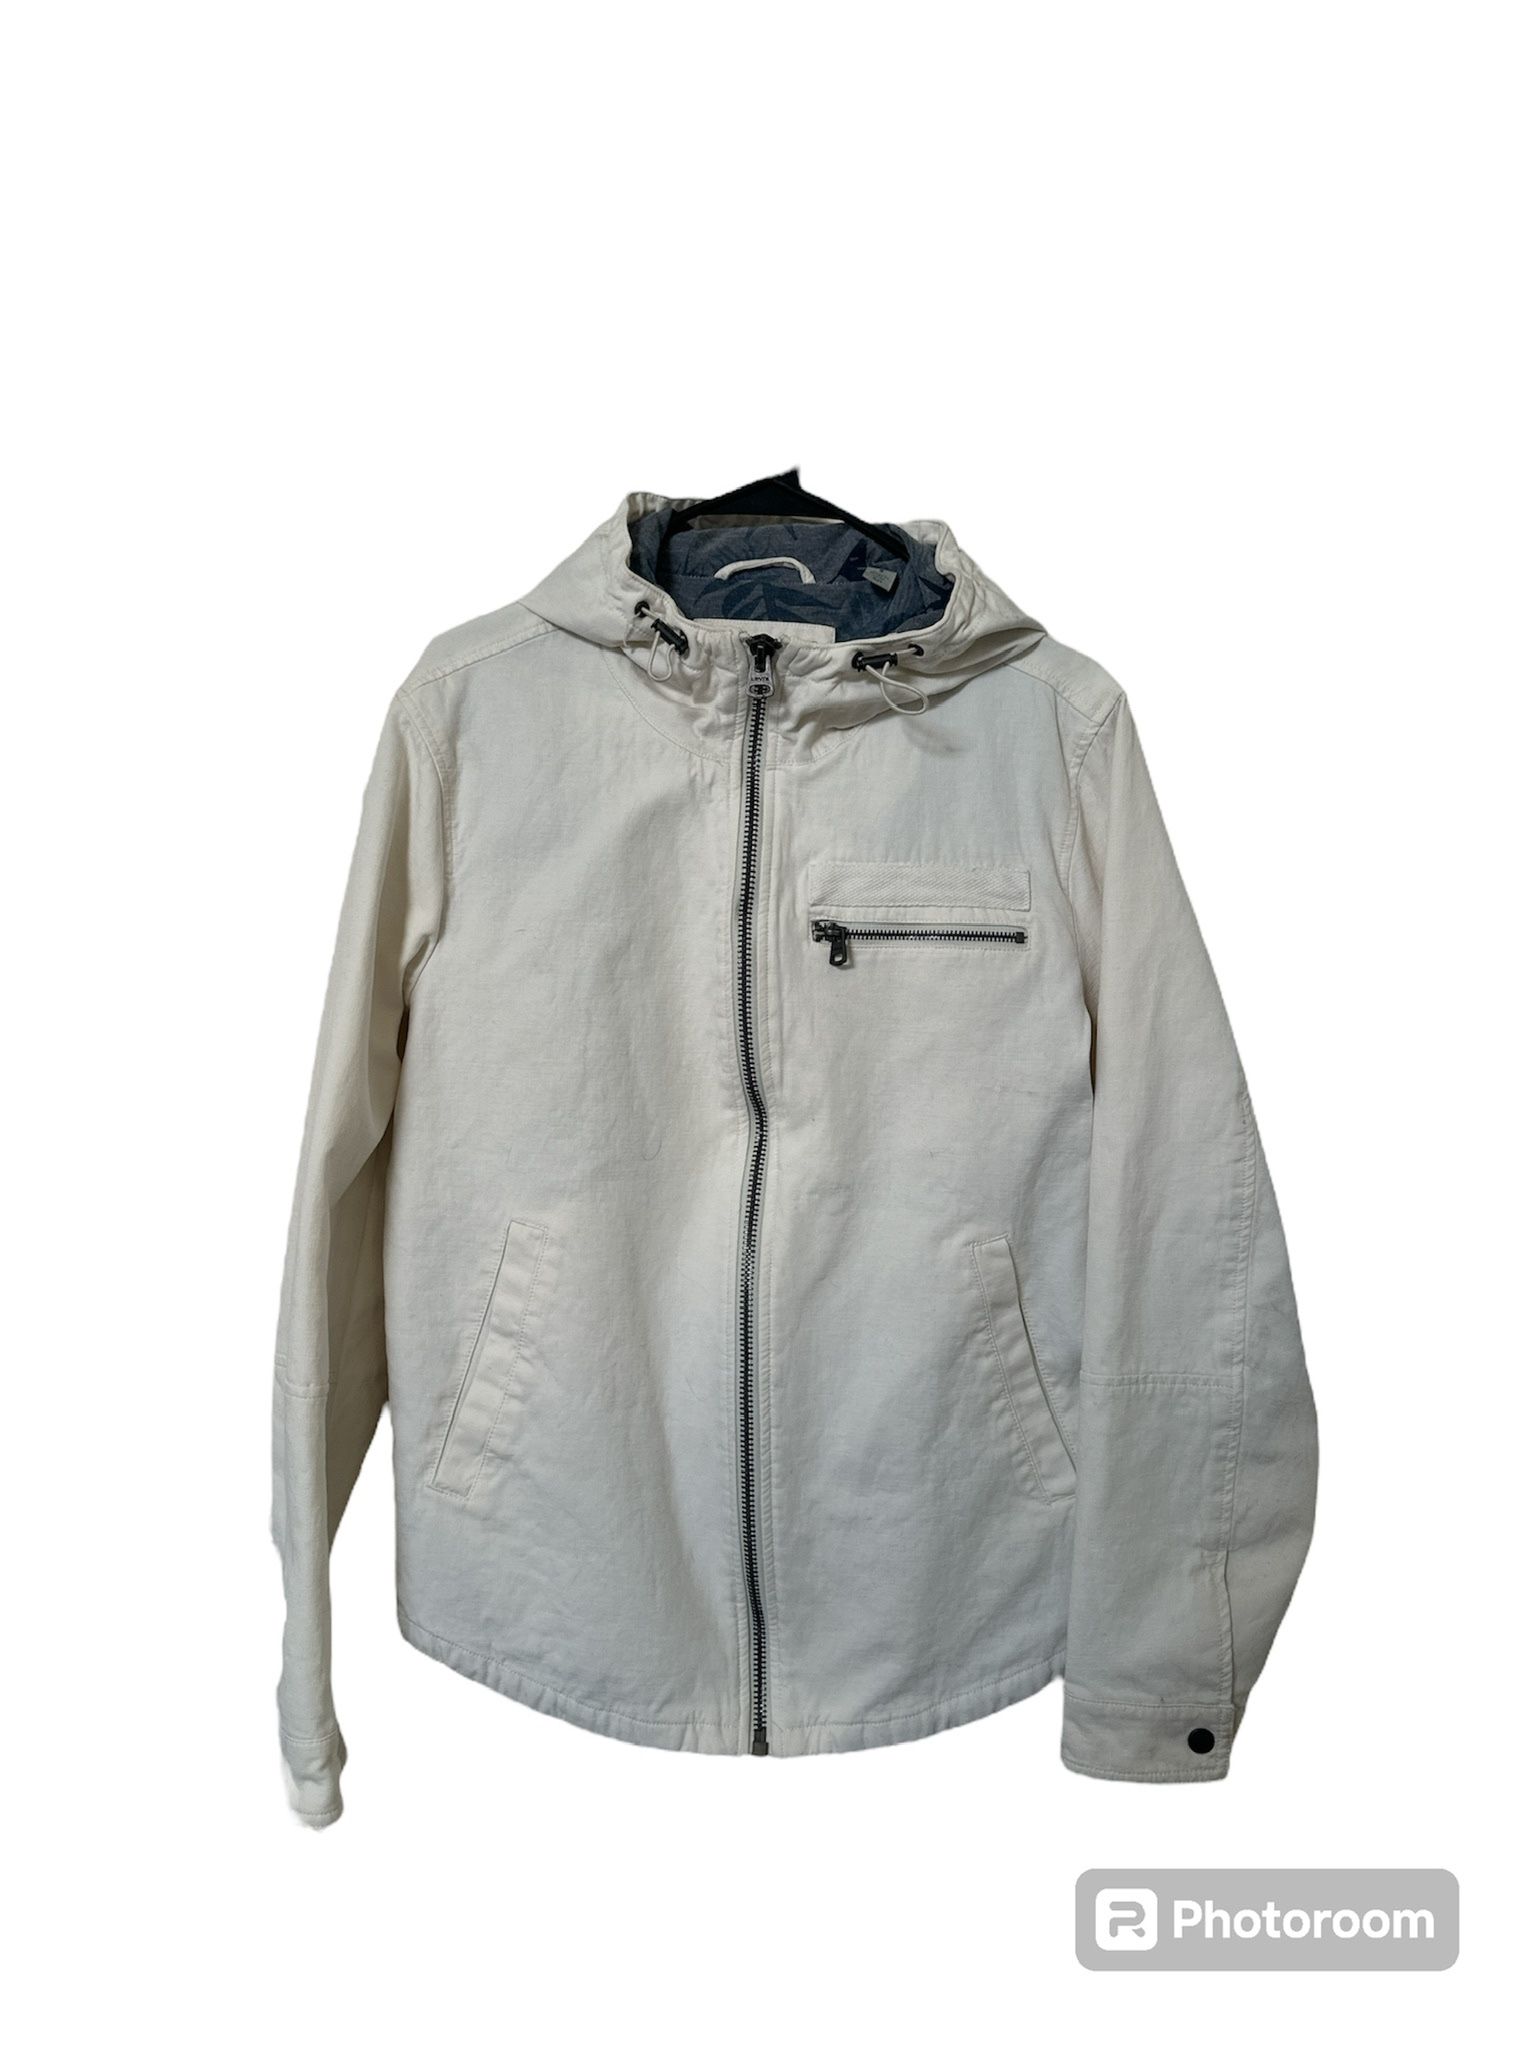 White Levi’s Zip Up Jacket With Hood (men’s Small)